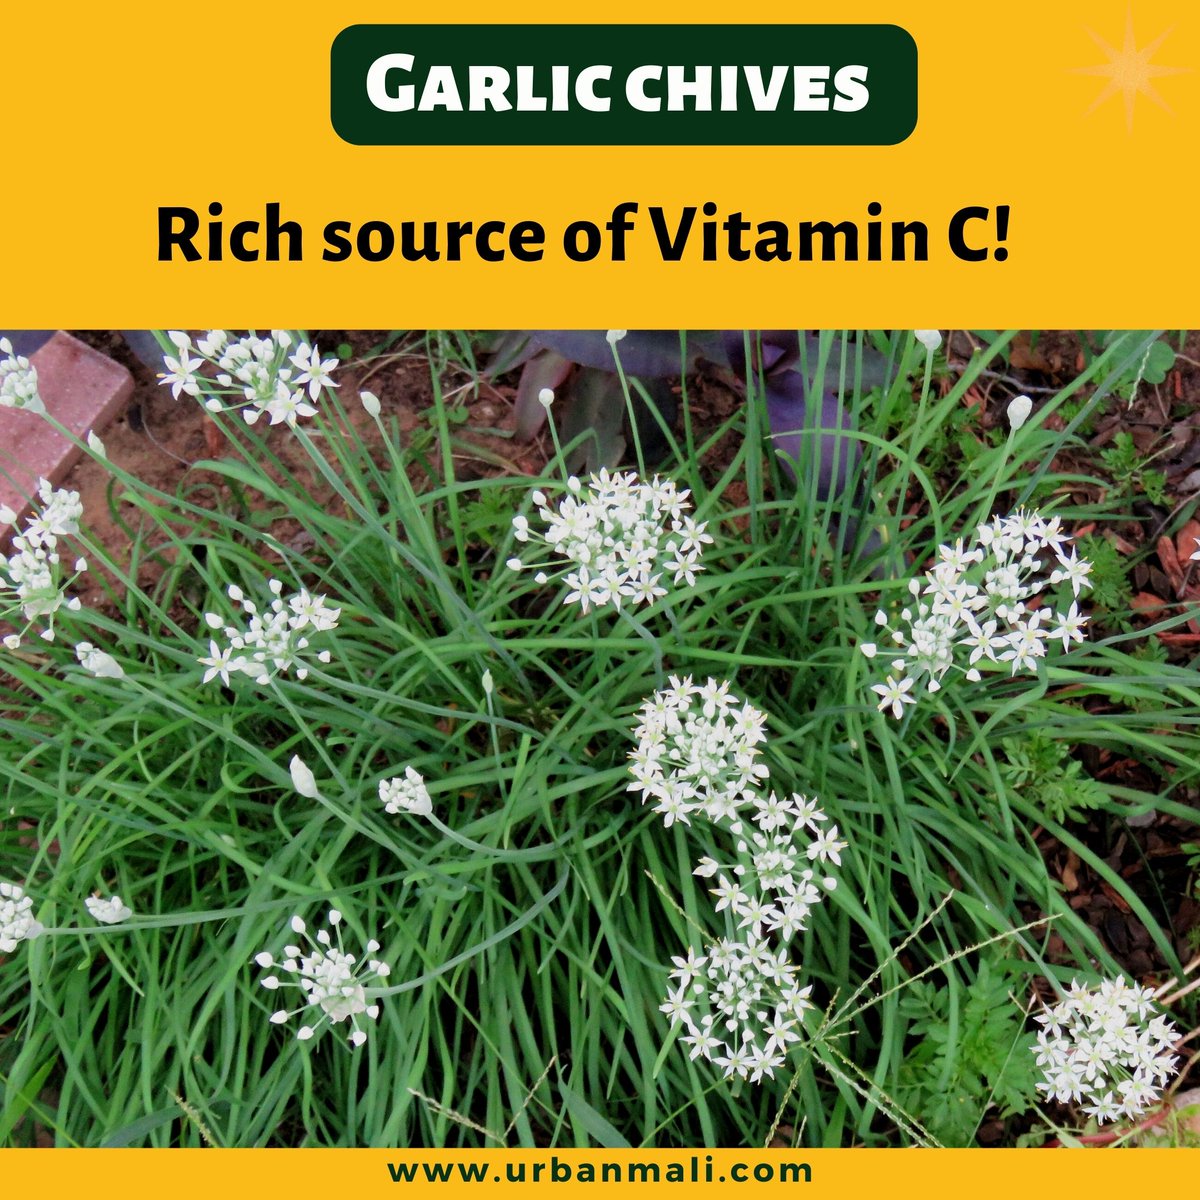 Did you know that Garlic Chives are not only flavorful but also packed with Vitamin C? Boost your immune system and add a zesty kick to your dishes with these nutrient-rich herbs.  

 #GarlicChives #VitaminC #HealthyHerbs  #plantaddict #urbangardening #homegardening #urbanmali#